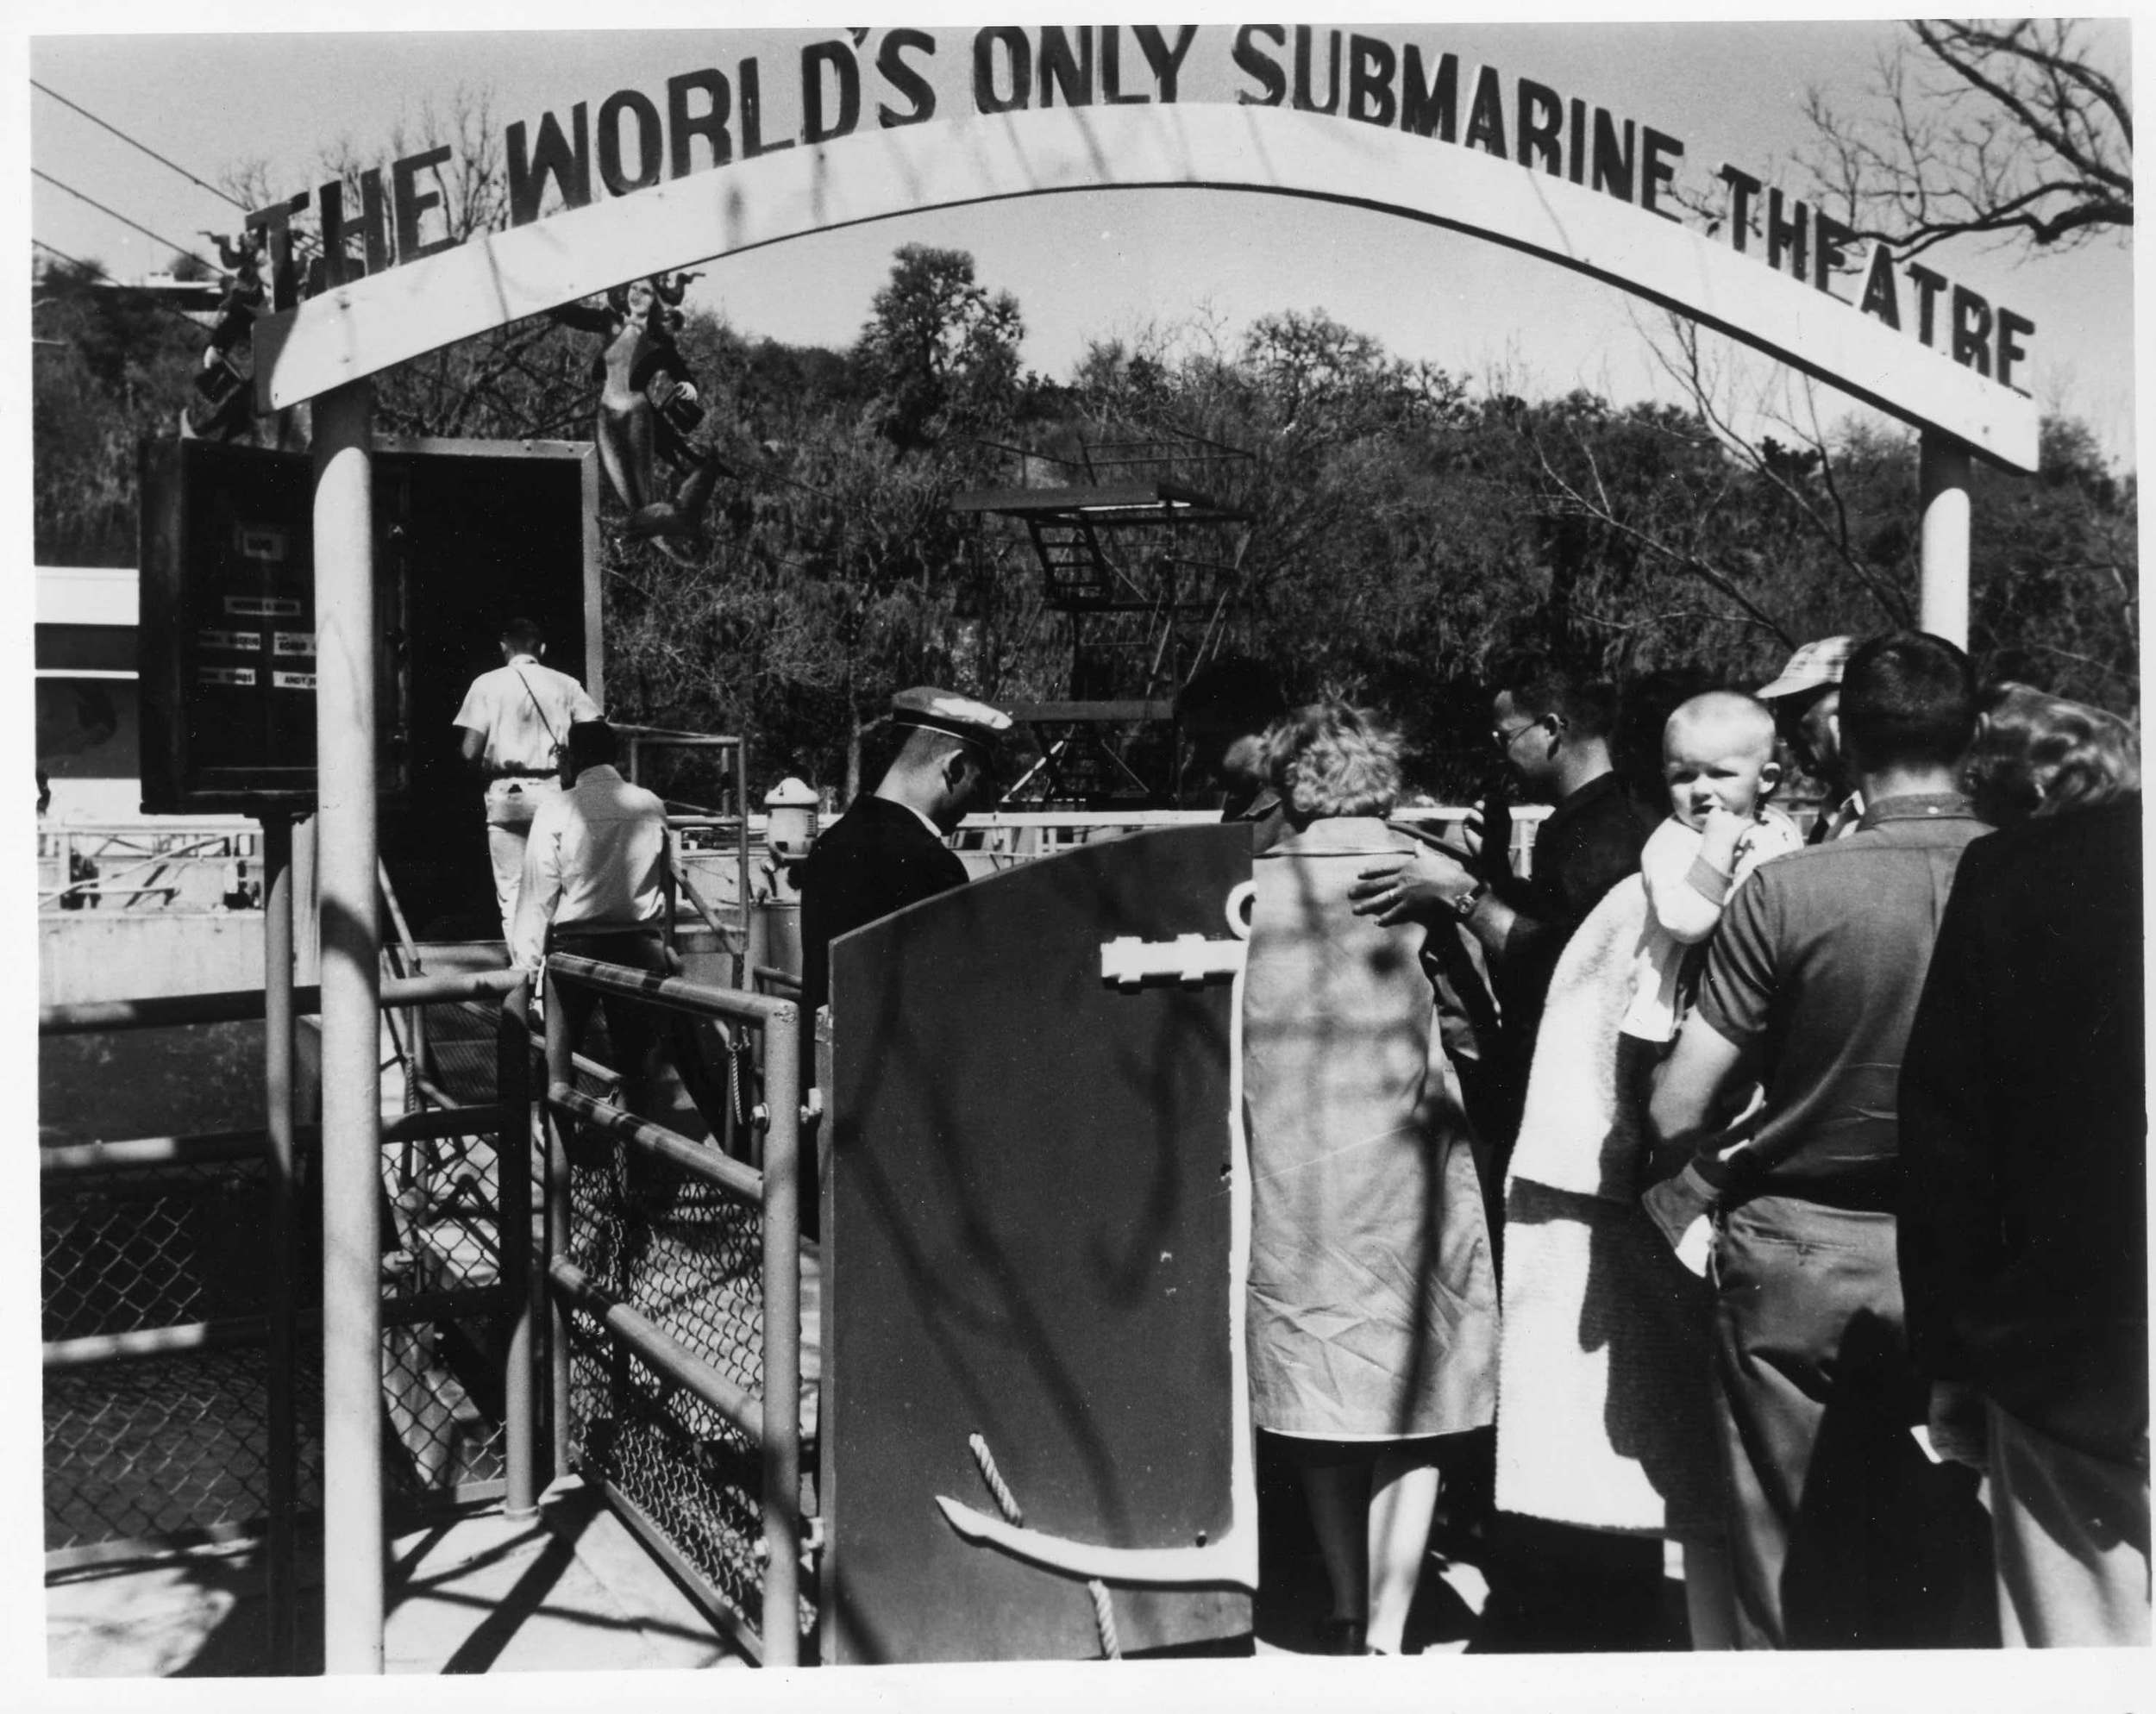 Guests enter the Worlds only Submarine Theater at Aquarena Springs in San Marcos Texas.jpg